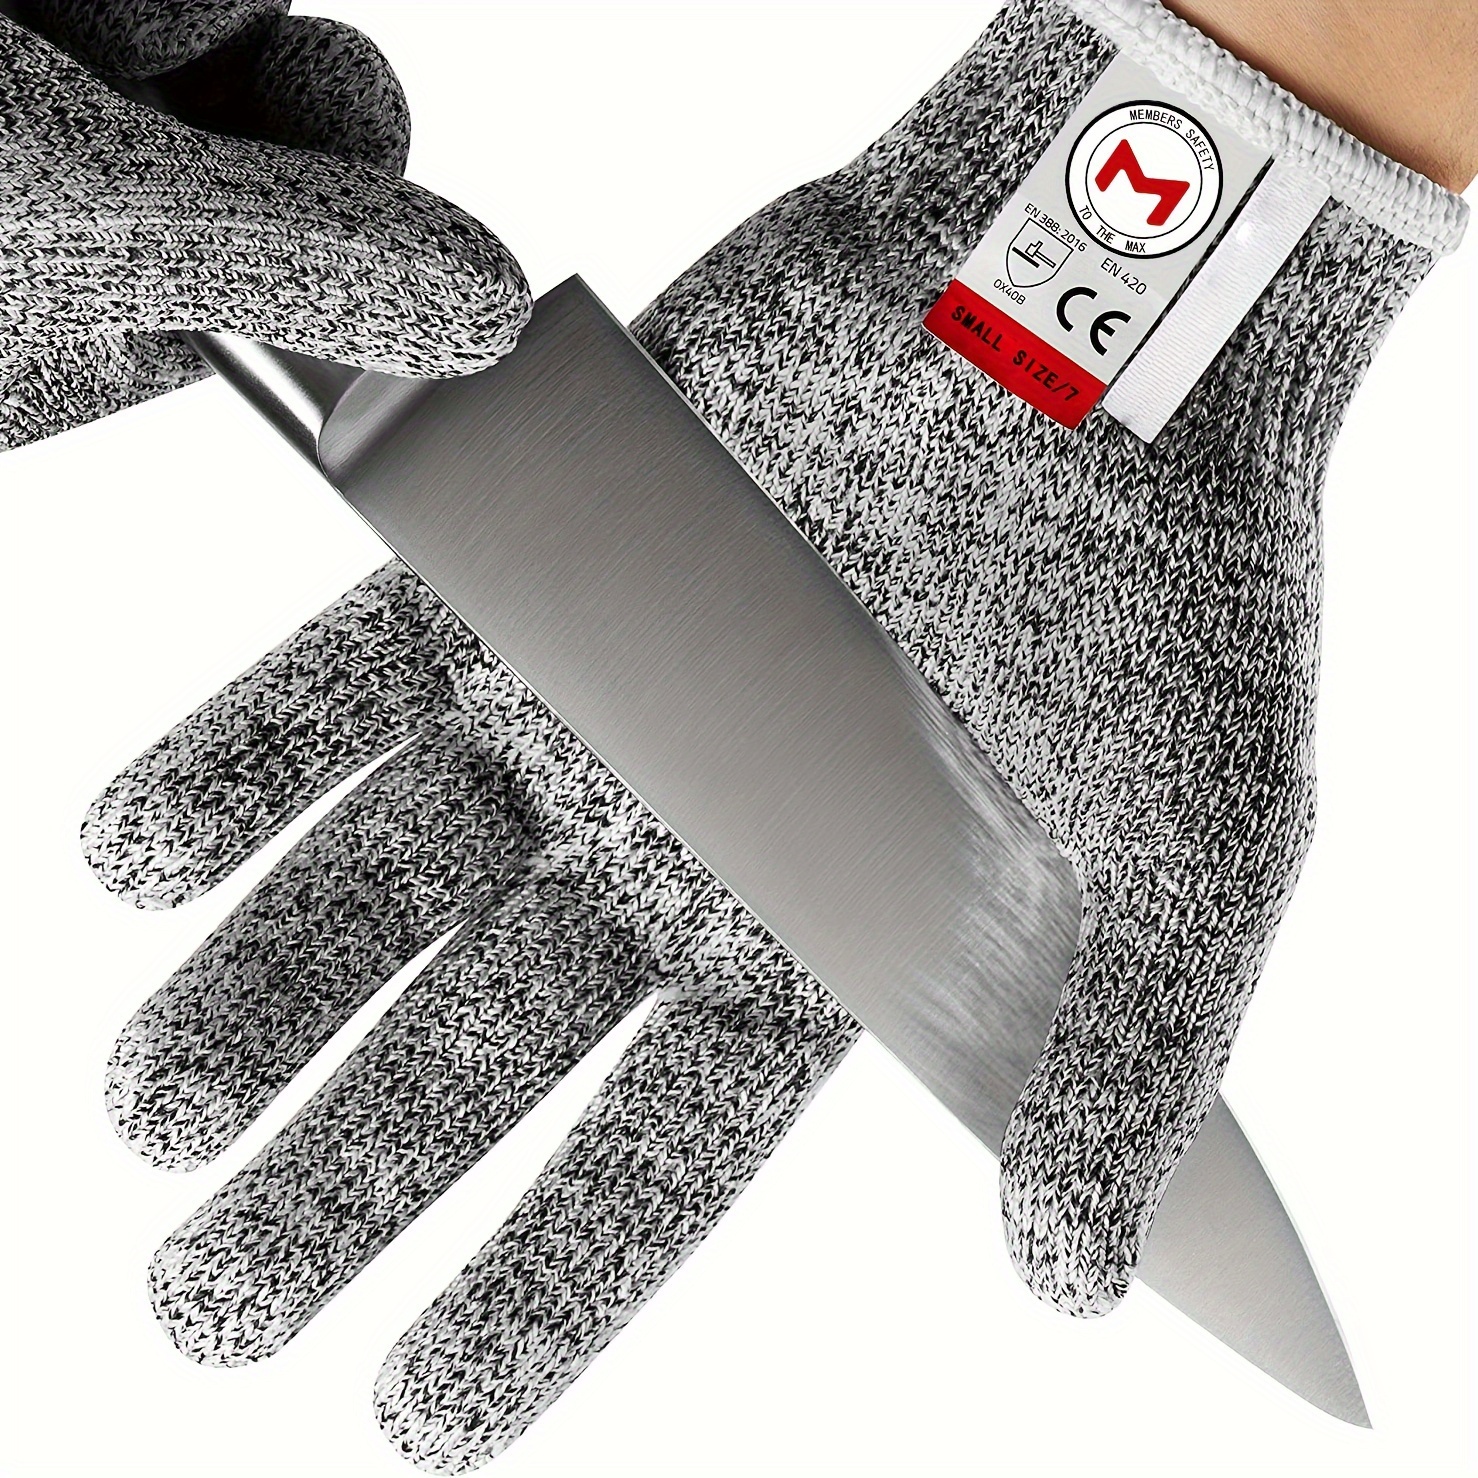 Cut Resistant Work Gloves For Women And Men, With Reinforced